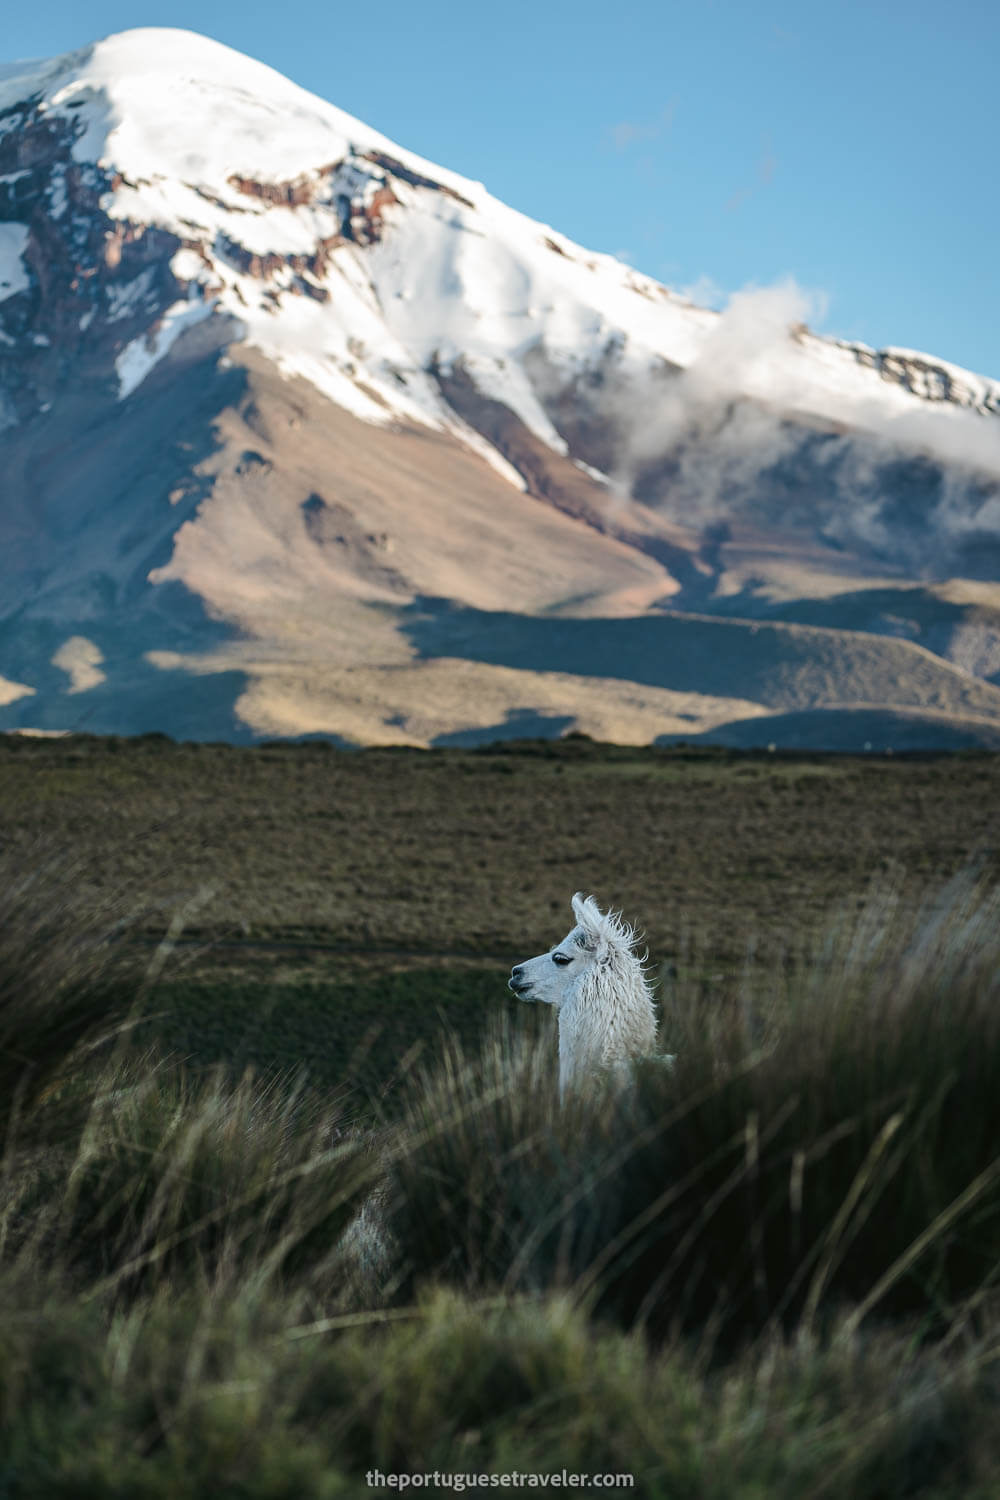 The white llama and the white volcano